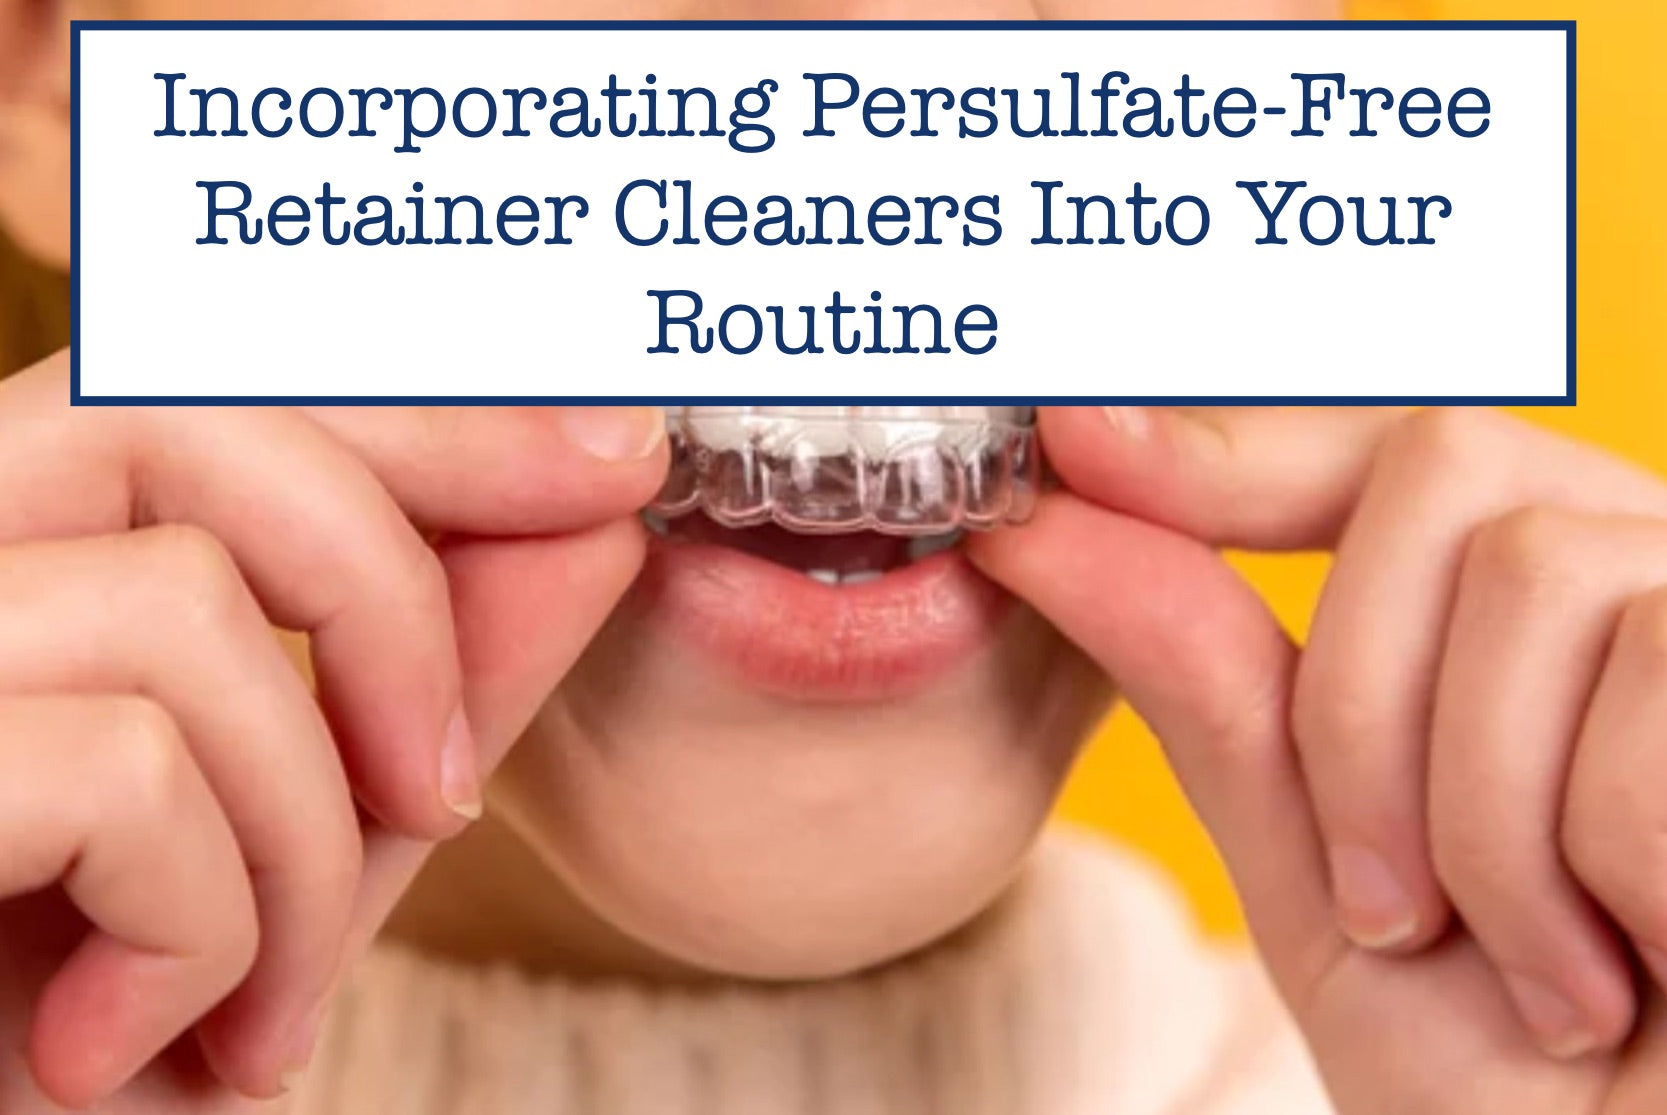 Incorporating Persulfate-Free Retainer Cleaners Into Your Routine